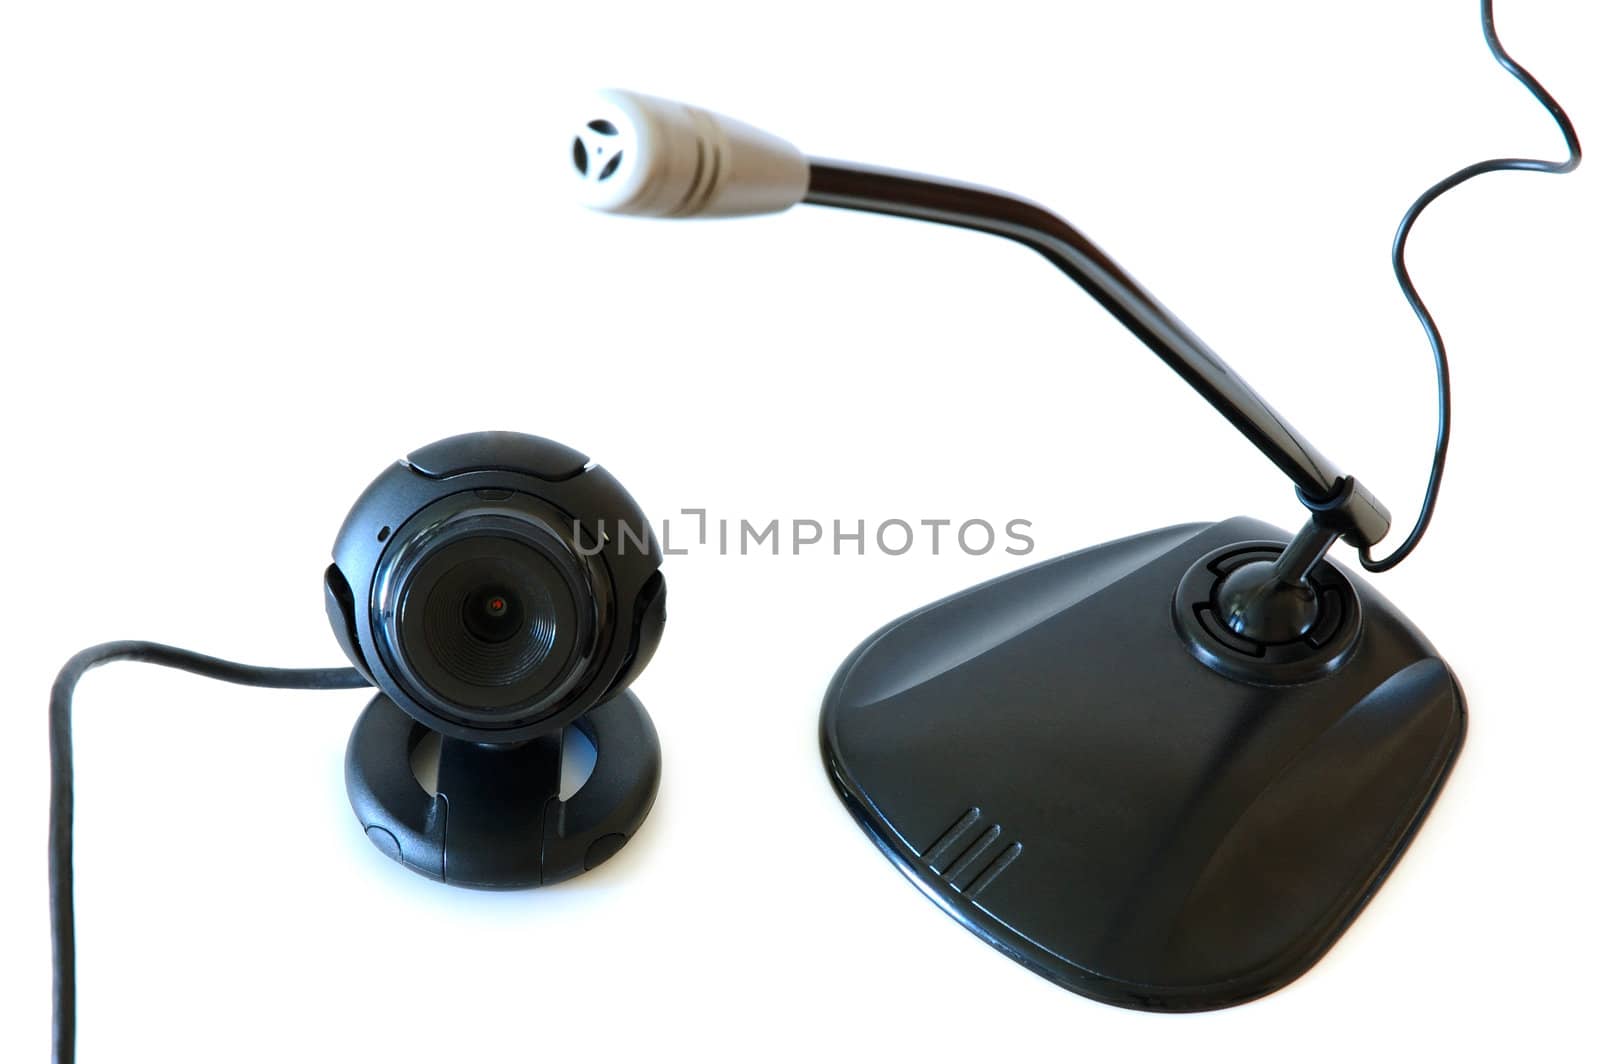 Webcamera and computer microphone. Black coloured. On isolated background.